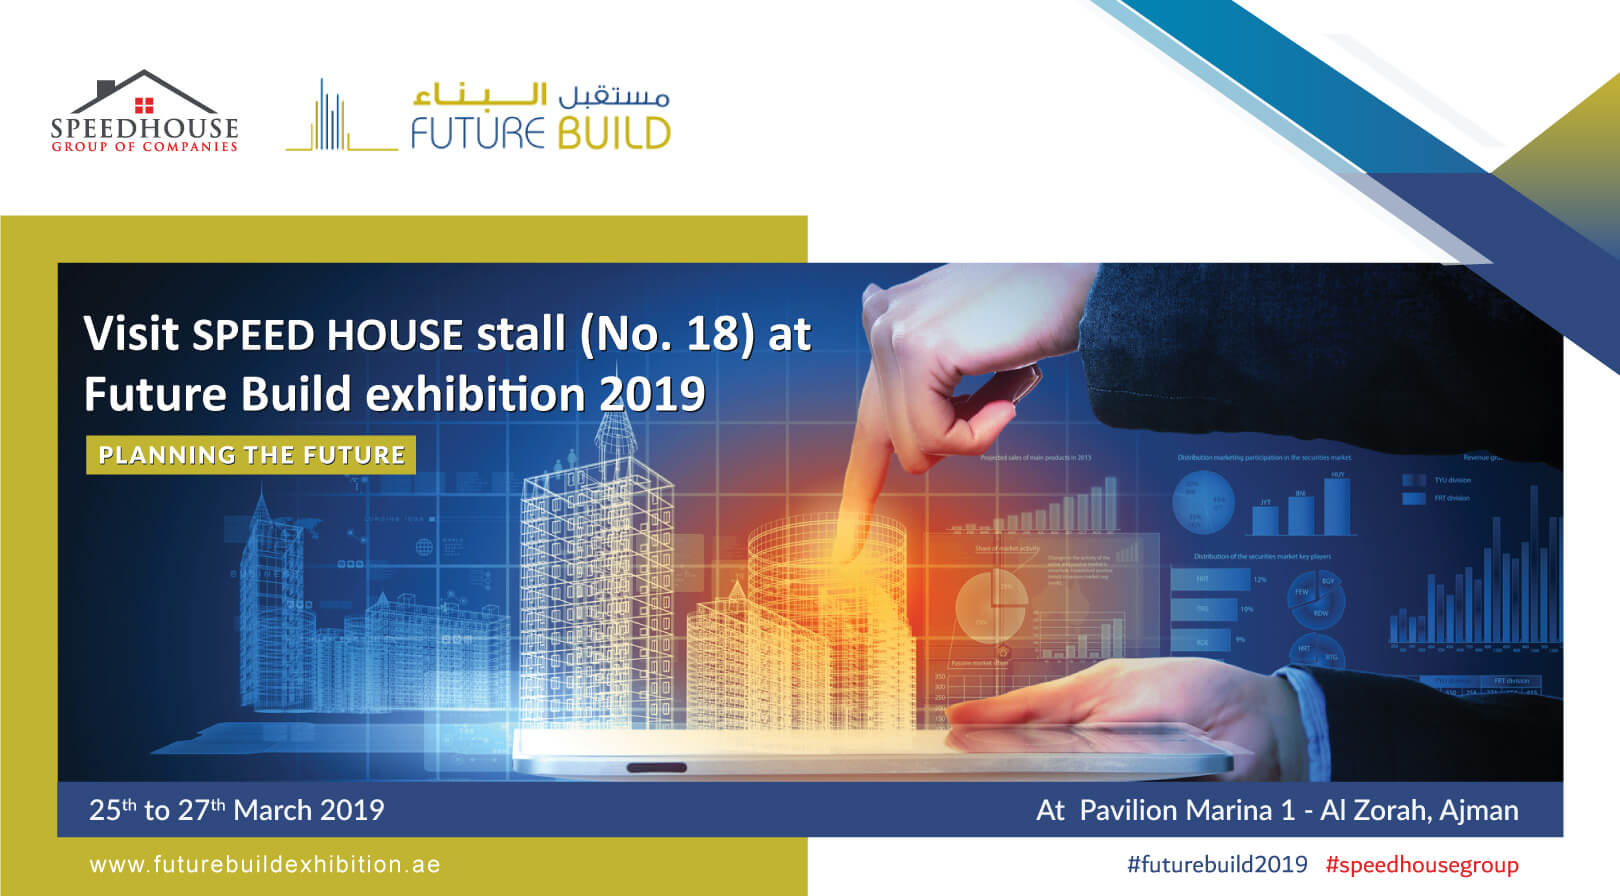 Speed House Group of Companies at Future Build Exhibition 2019